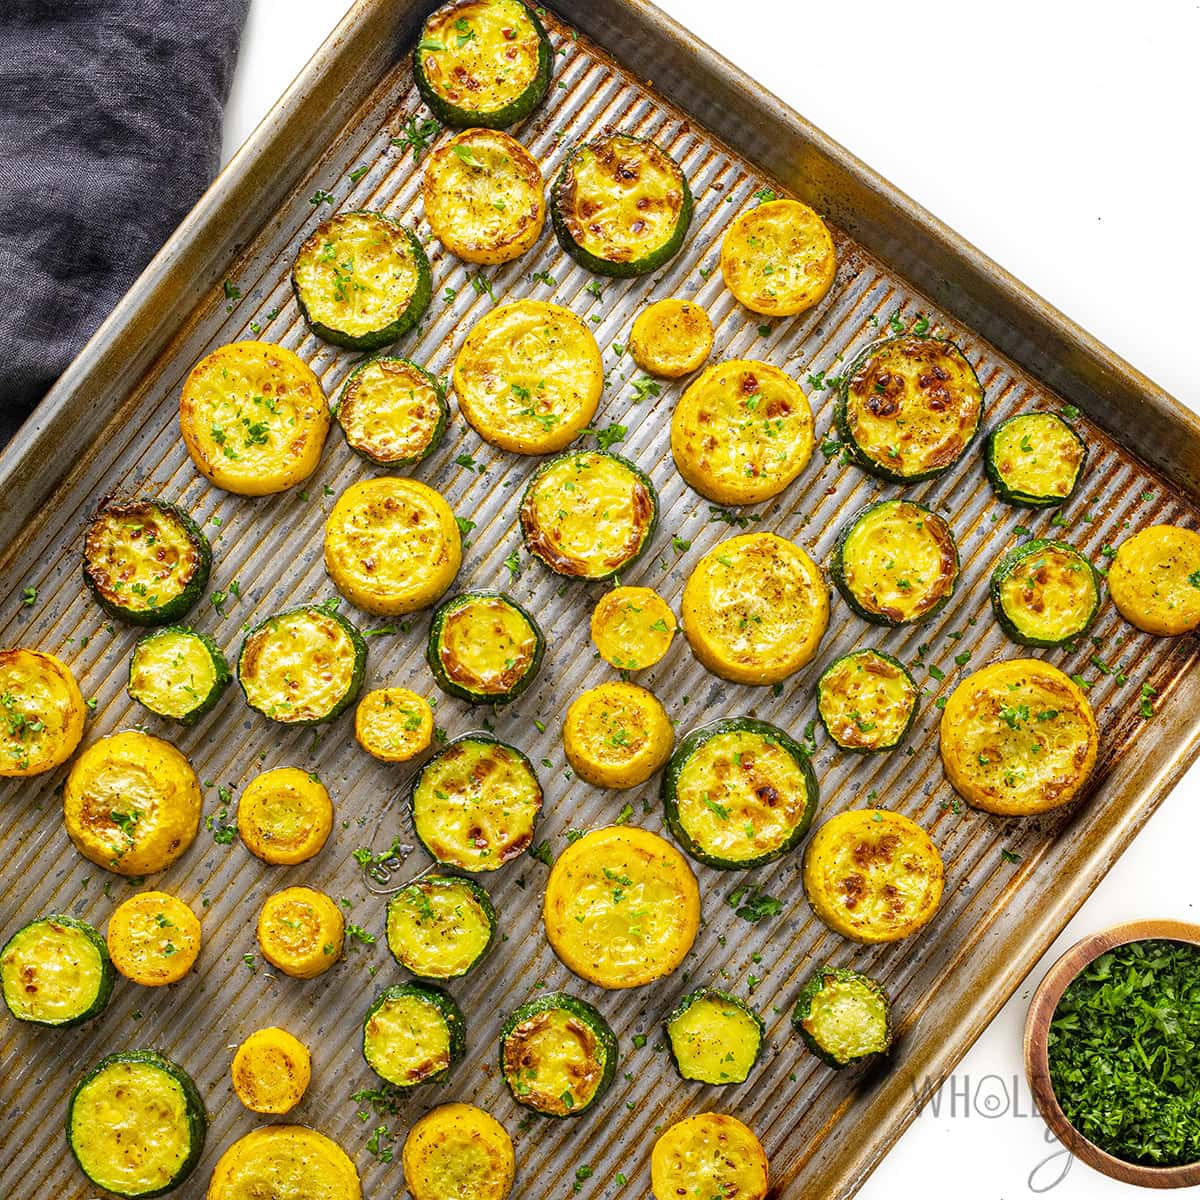 Roasted zucchini and squash on a baking sheet.